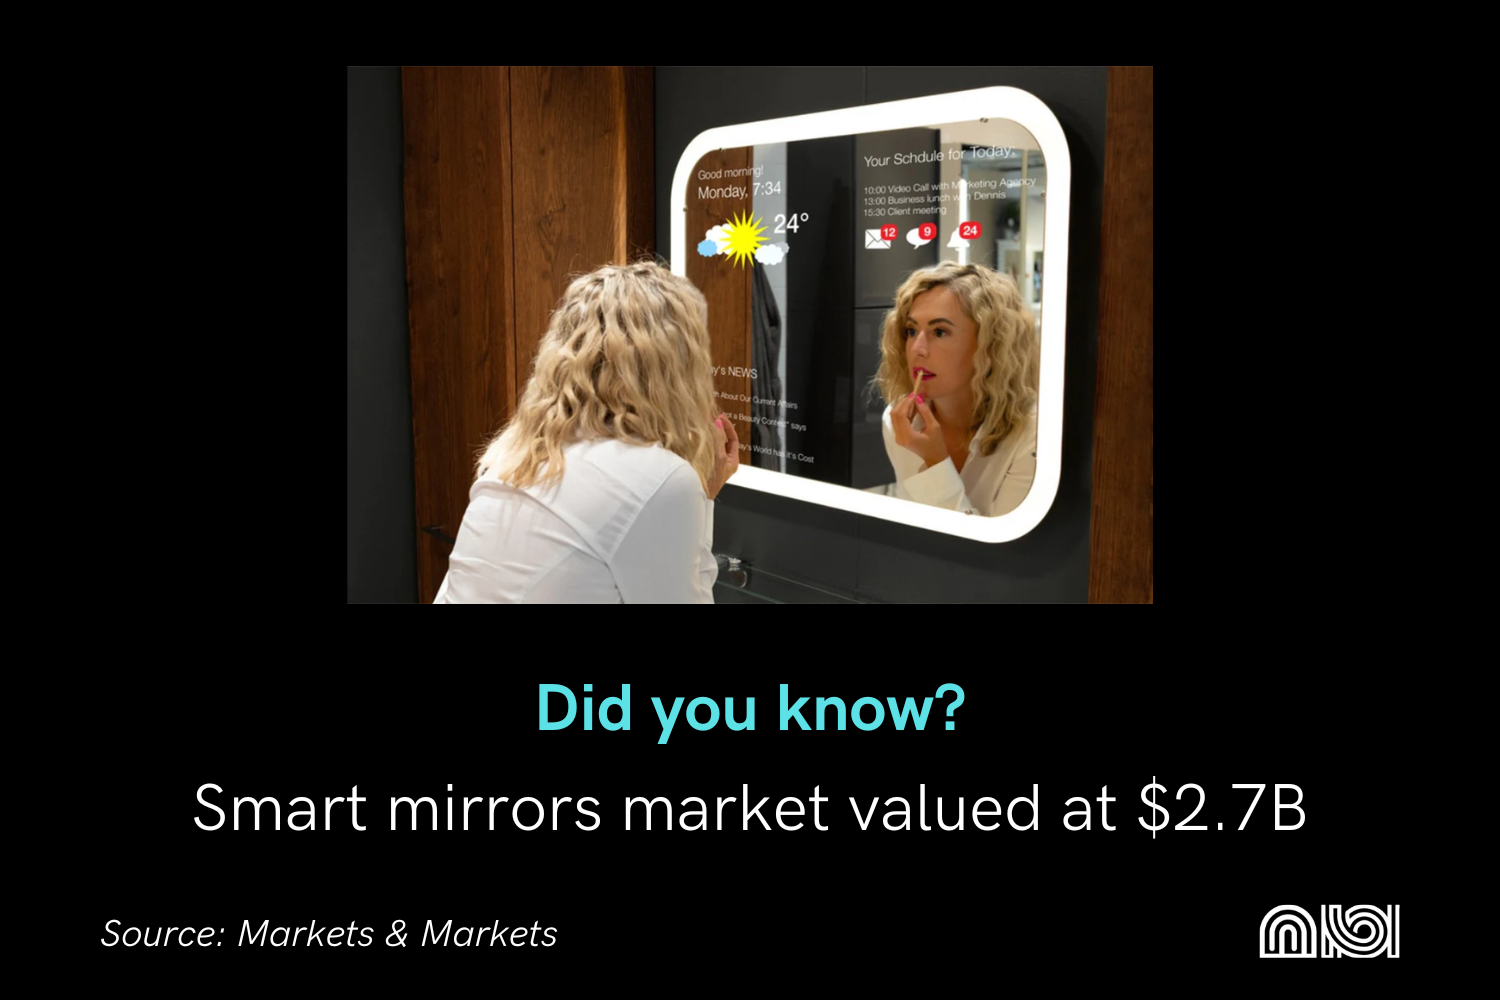 Smart mirrors are becoming increasingly popular as they offer a variety of features, such as weather updates, news headlines, and music streaming.